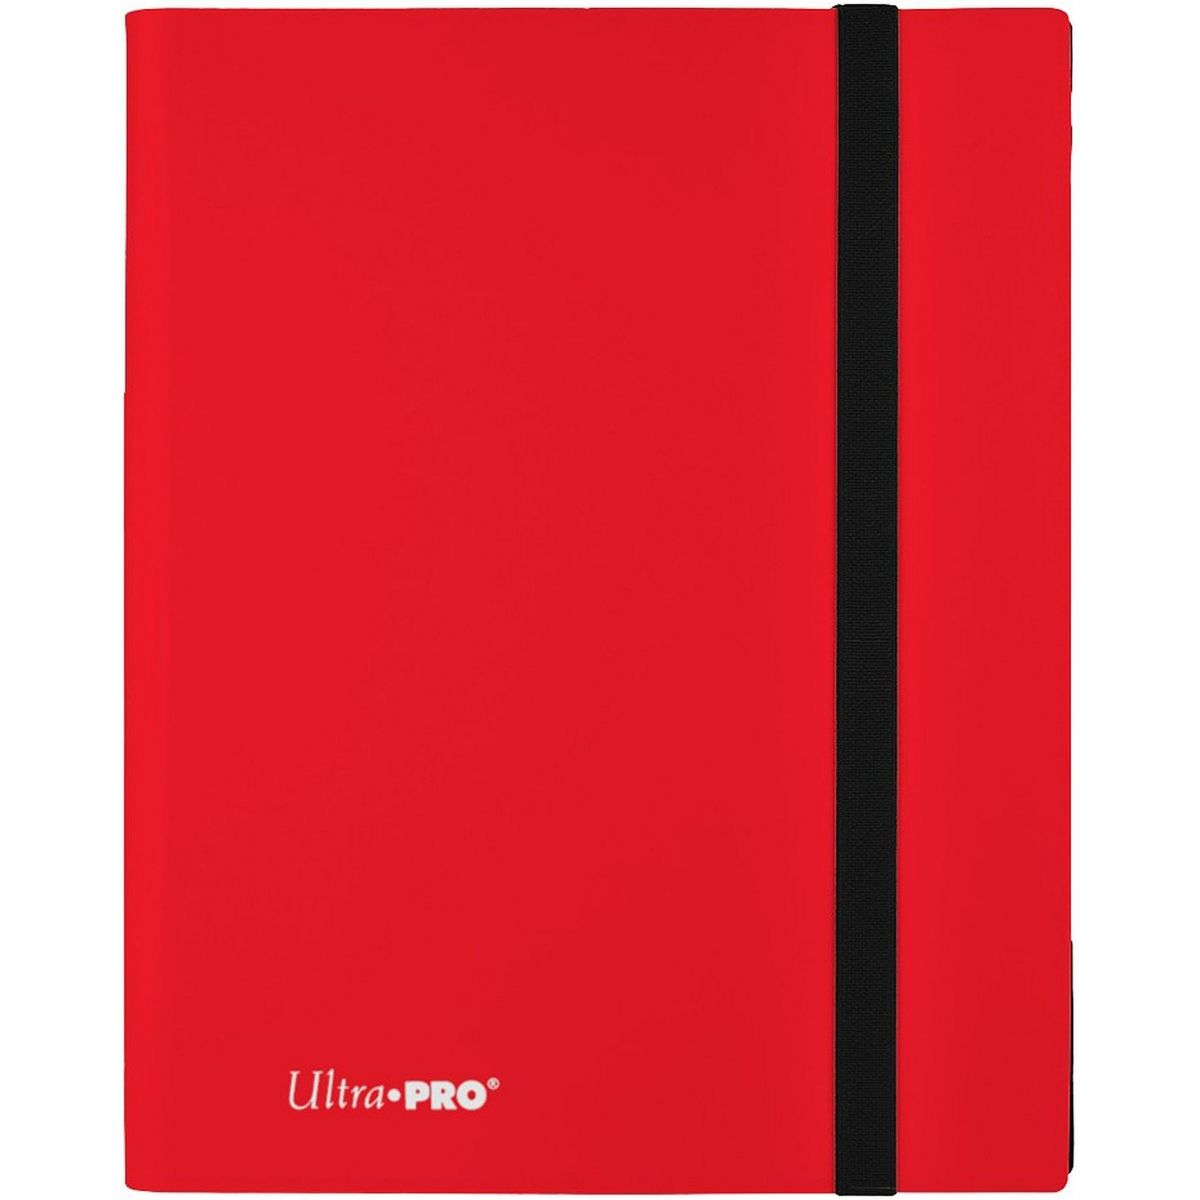 Ultra Pro - Pro Binder - Eclipse - 9 Cases - Red / Apple Red (360)